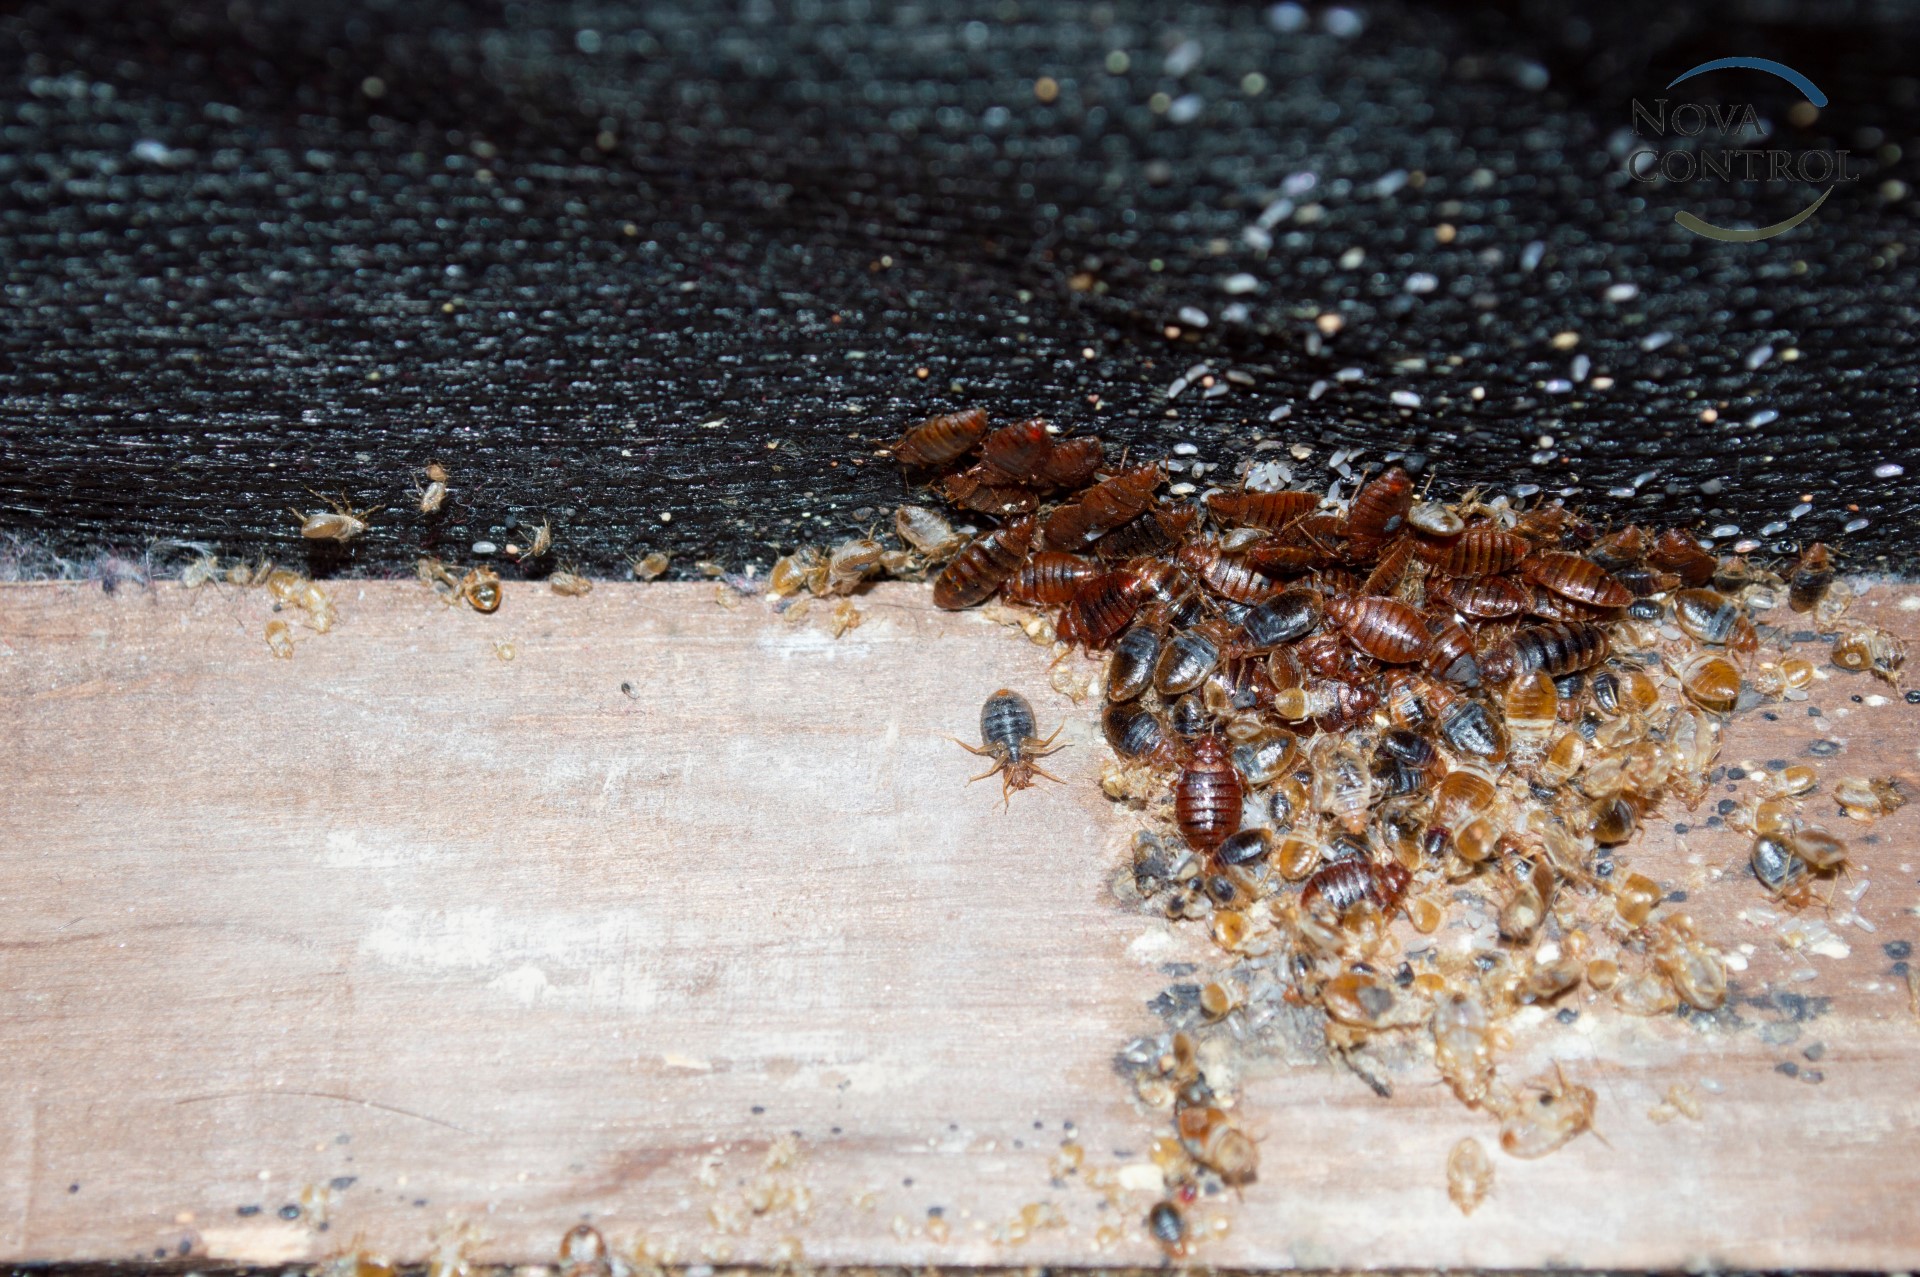 Cimex lectularius or bedbugs infest a wooden bed frame in city centre apartment building while being revealed by a pest control professional prior to treatment with pesticides.